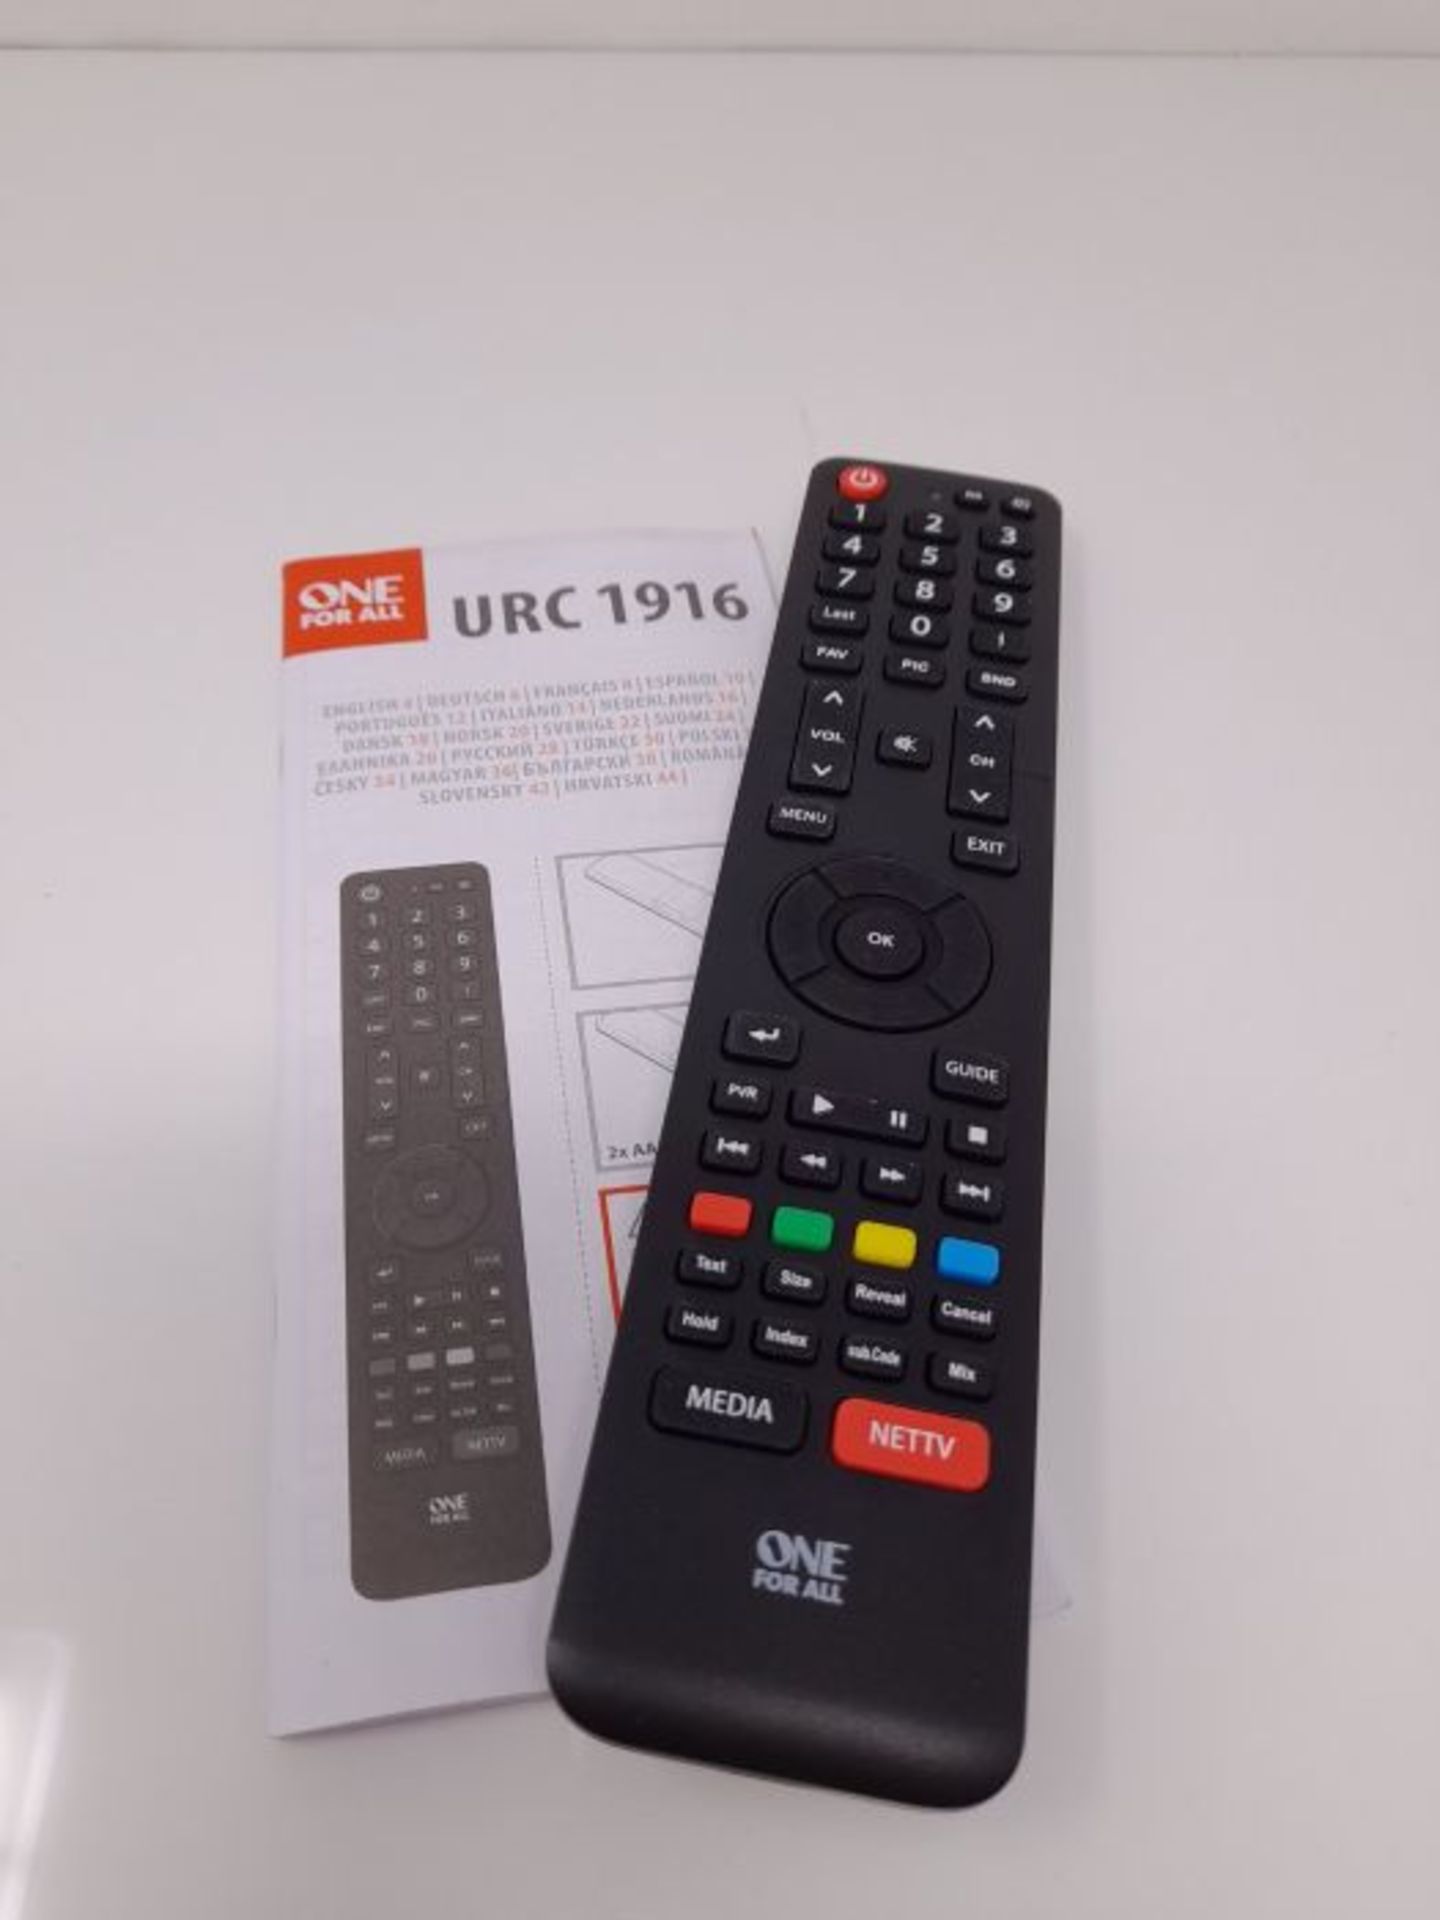 One For All Hisense TV Replacement remote URC1916 - Works with ALL Hisense televisions - Image 2 of 3